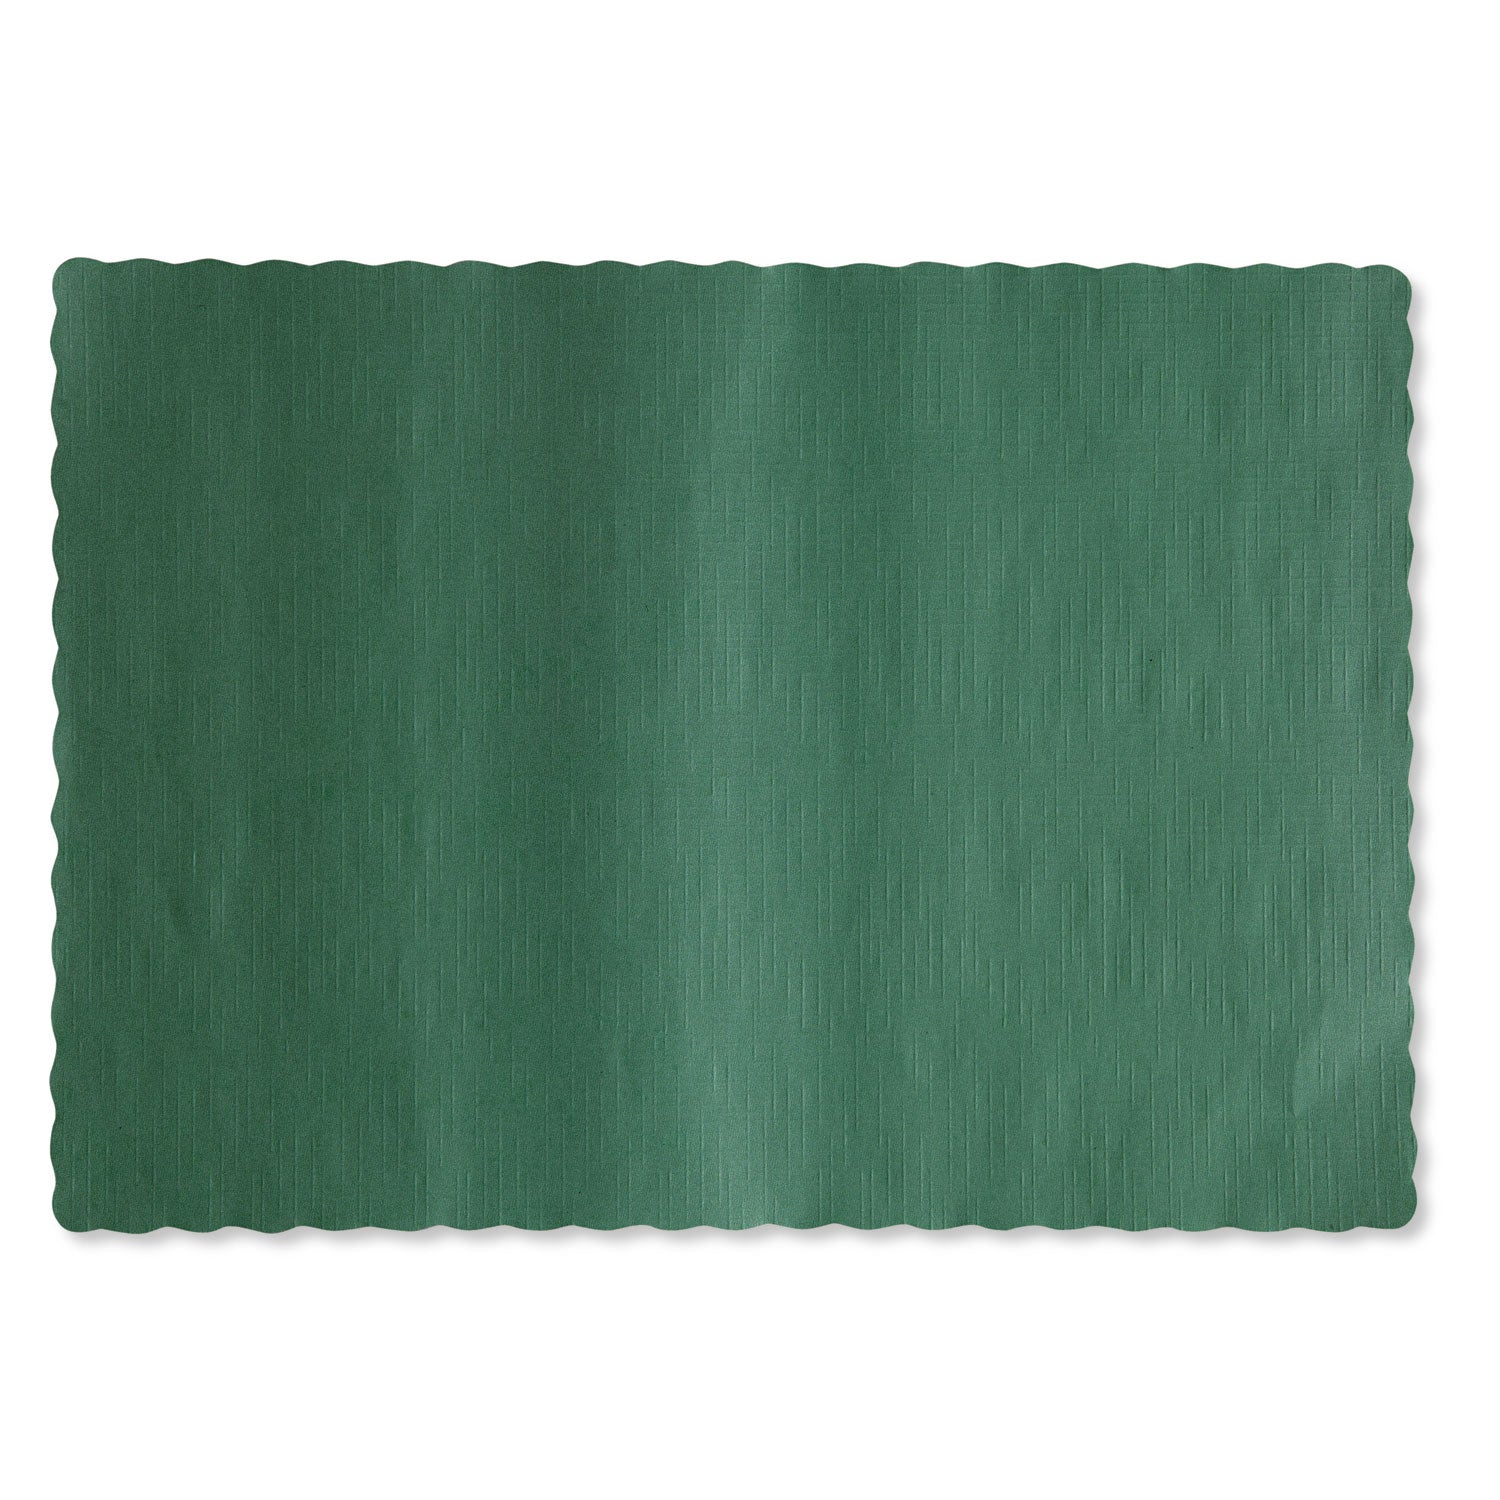 solid-color-scalloped-edge-placemats-95-x-135-hunter-green-1000-carton_hfm310528 - 2